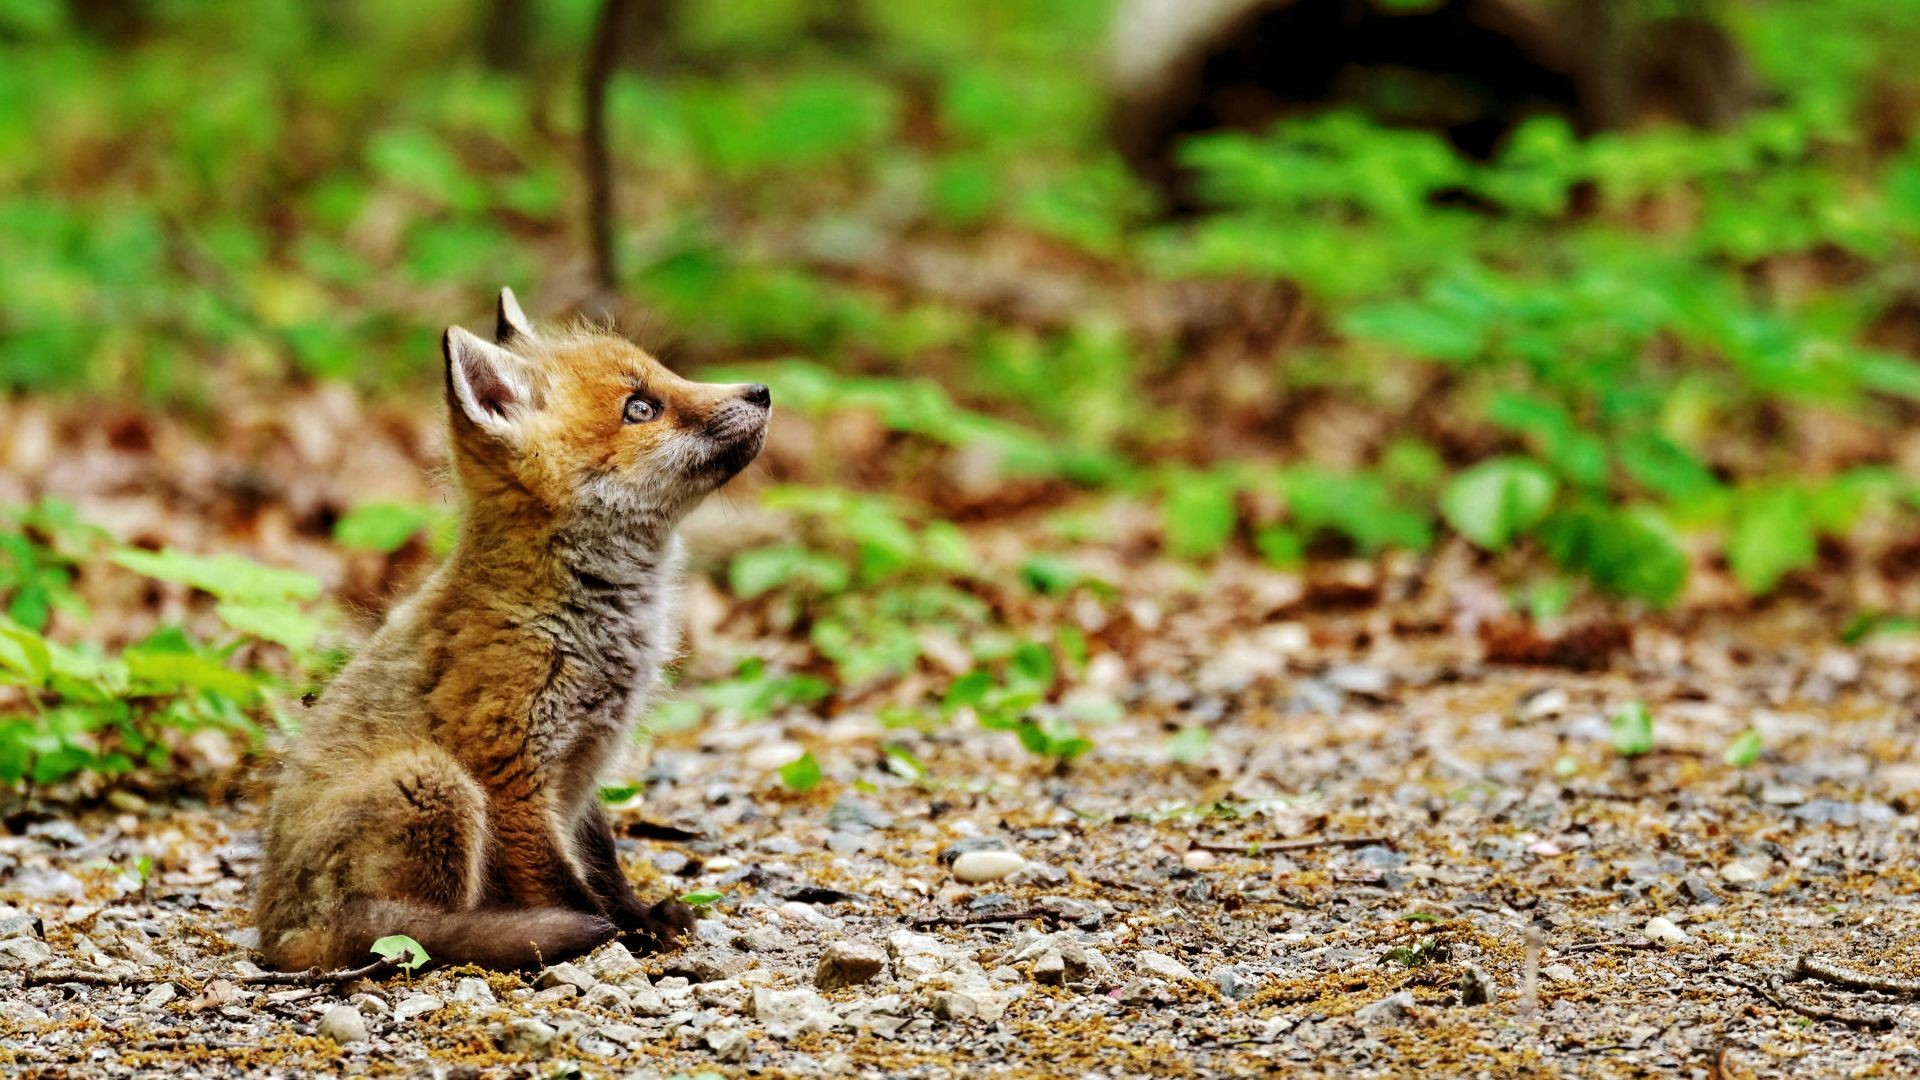 General 1920x1080 nature animals baby animals fox sitting field plants depth of field outdoors